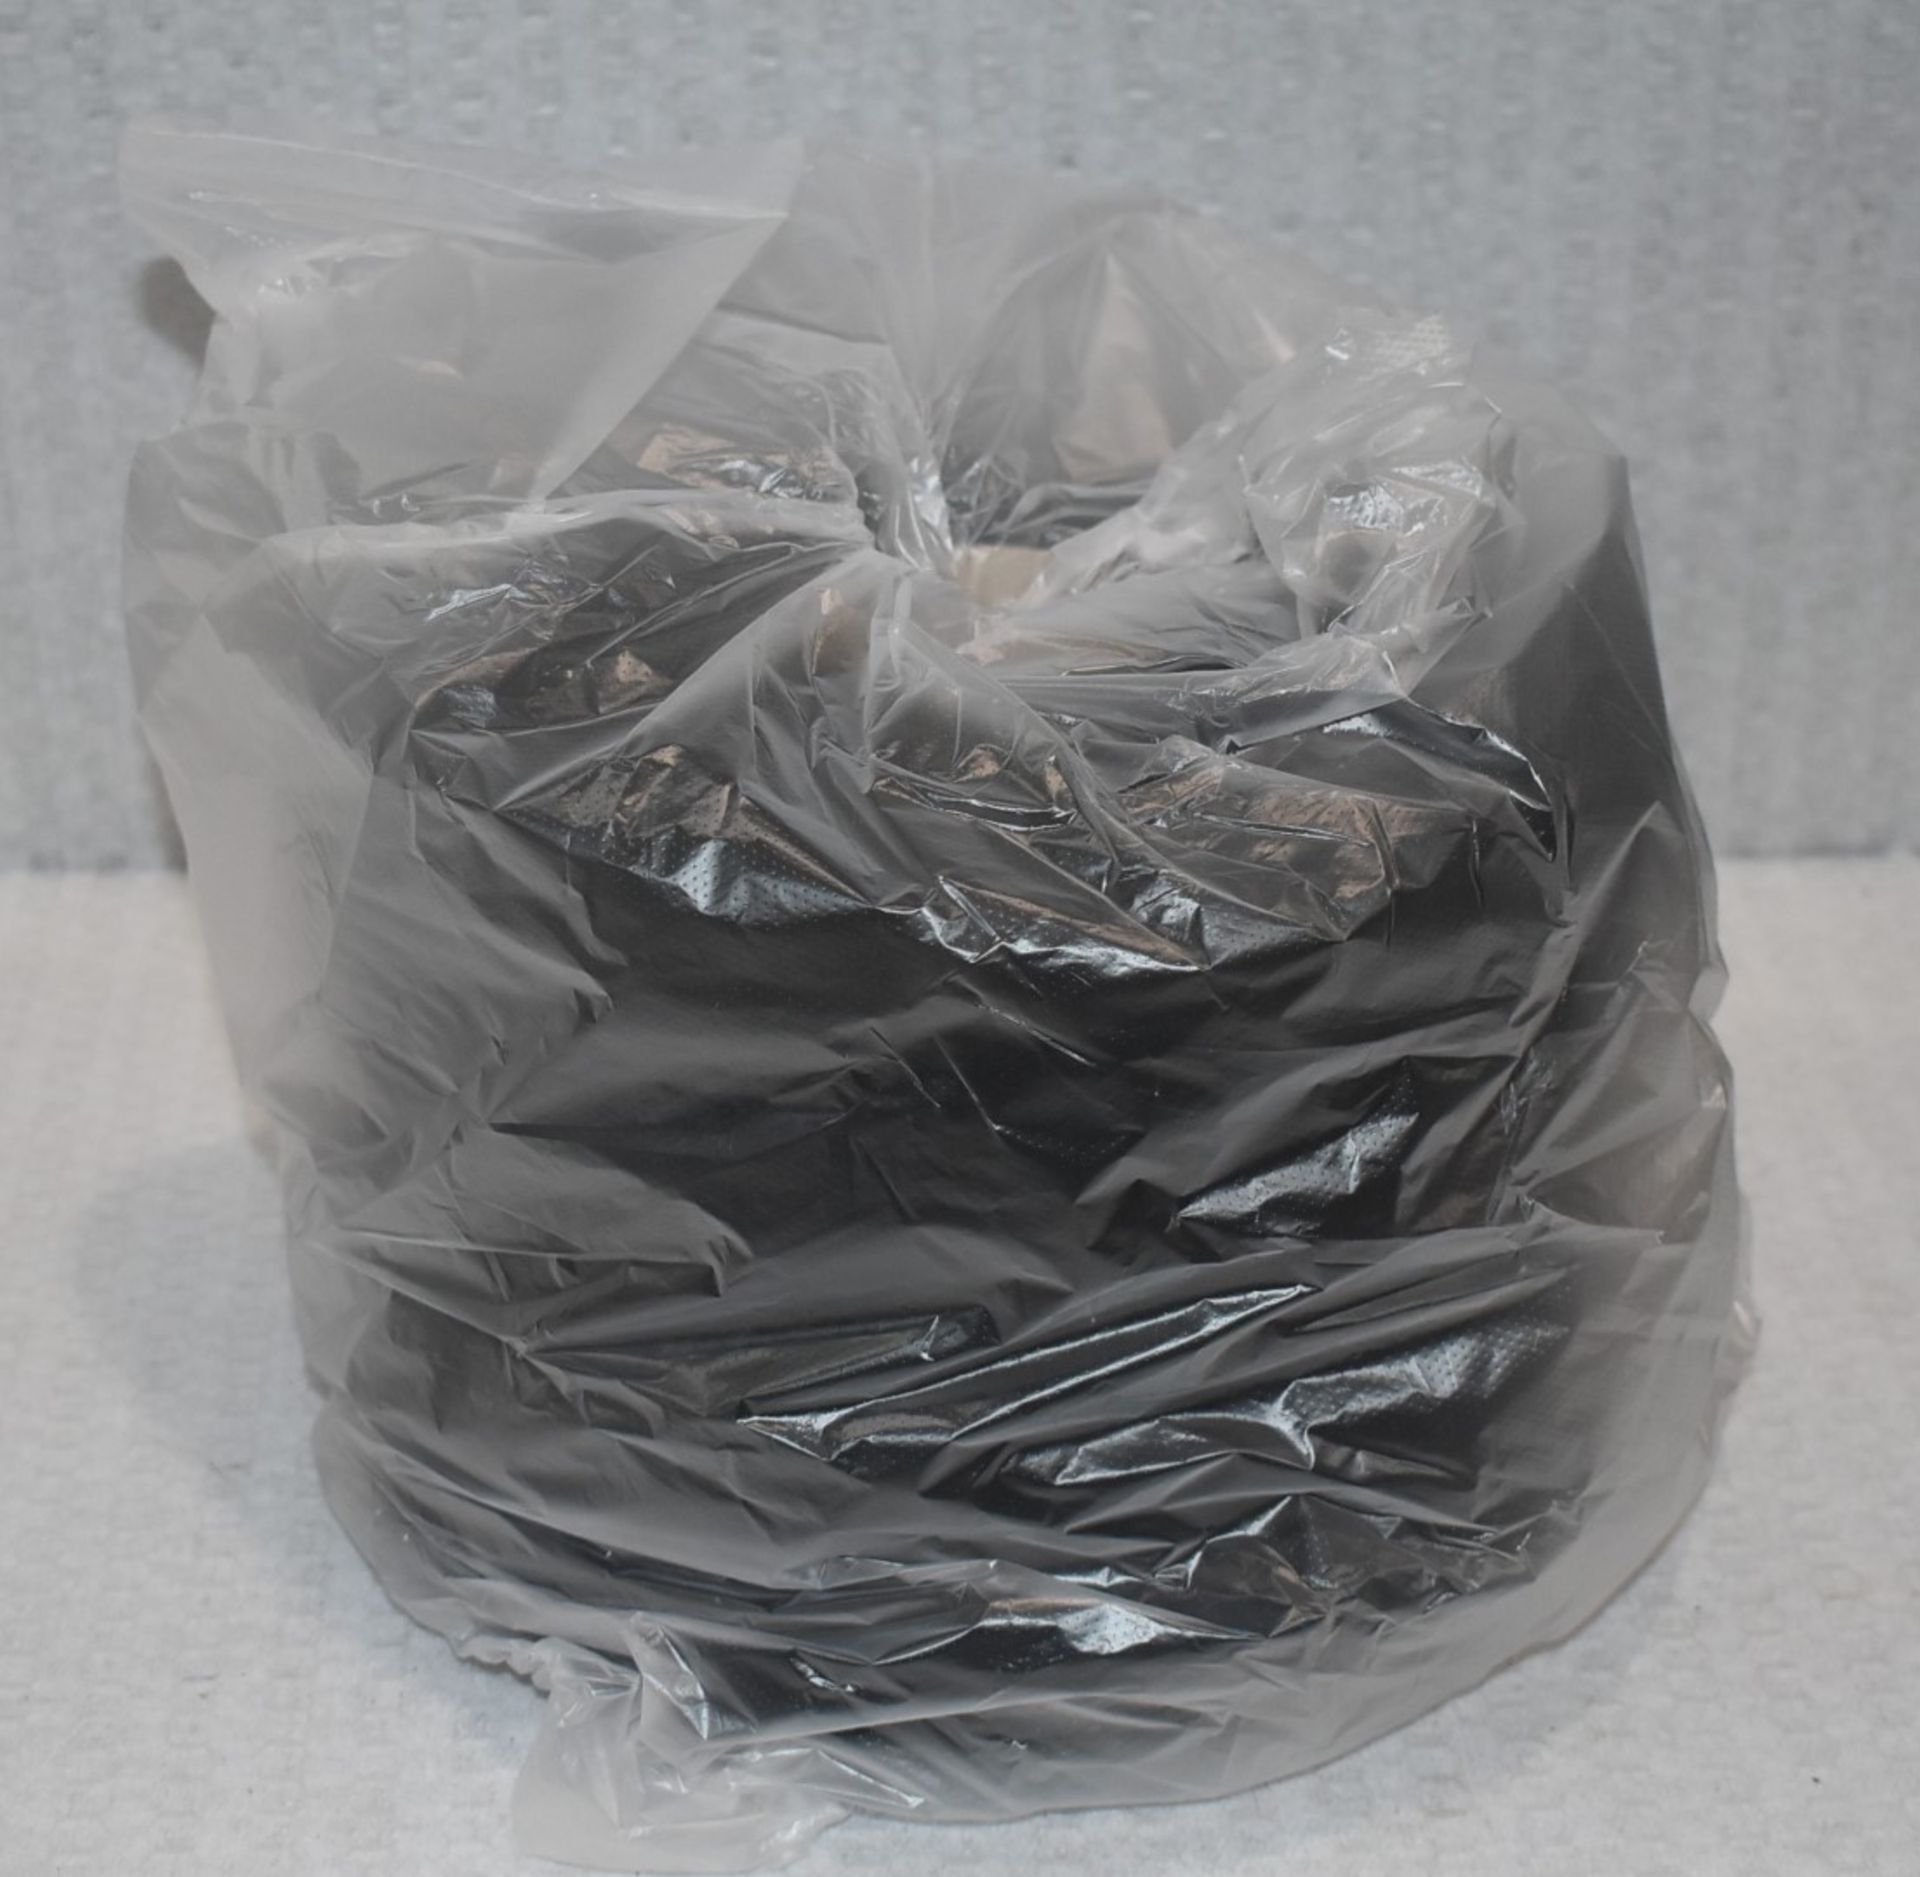 6 x Cones of 1/7,5 Lagona Knitting Yarn - Charcoal - Approx Weight: 2,300g - New Stock ABL Yarn - Image 3 of 9